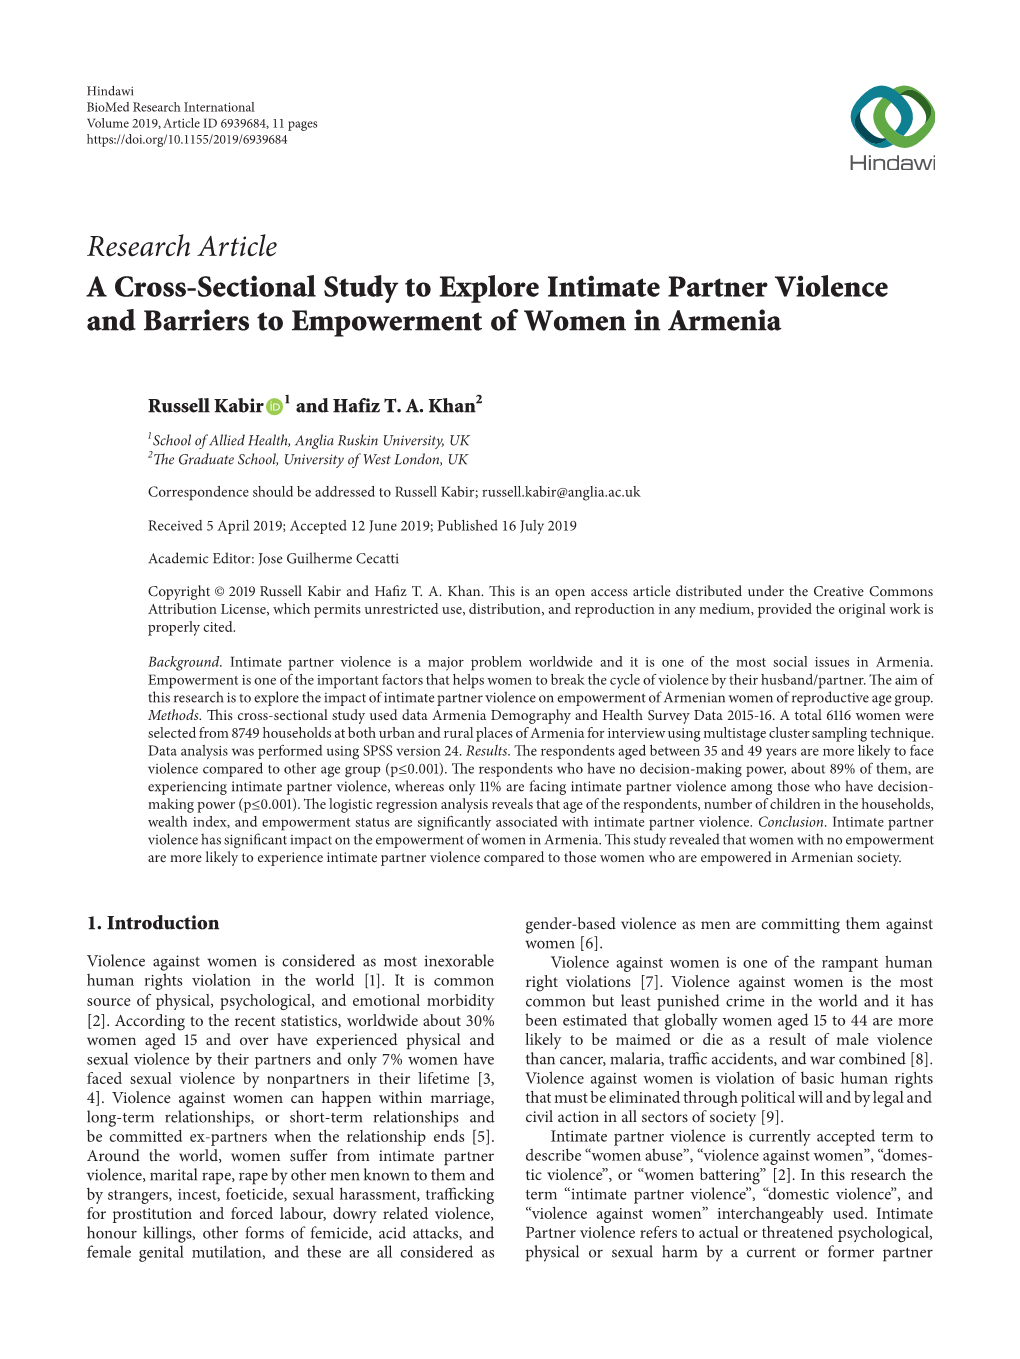 A Cross-Sectional Study to Explore Intimate Partner Violence and Barriers to Empowerment of Women in Armenia